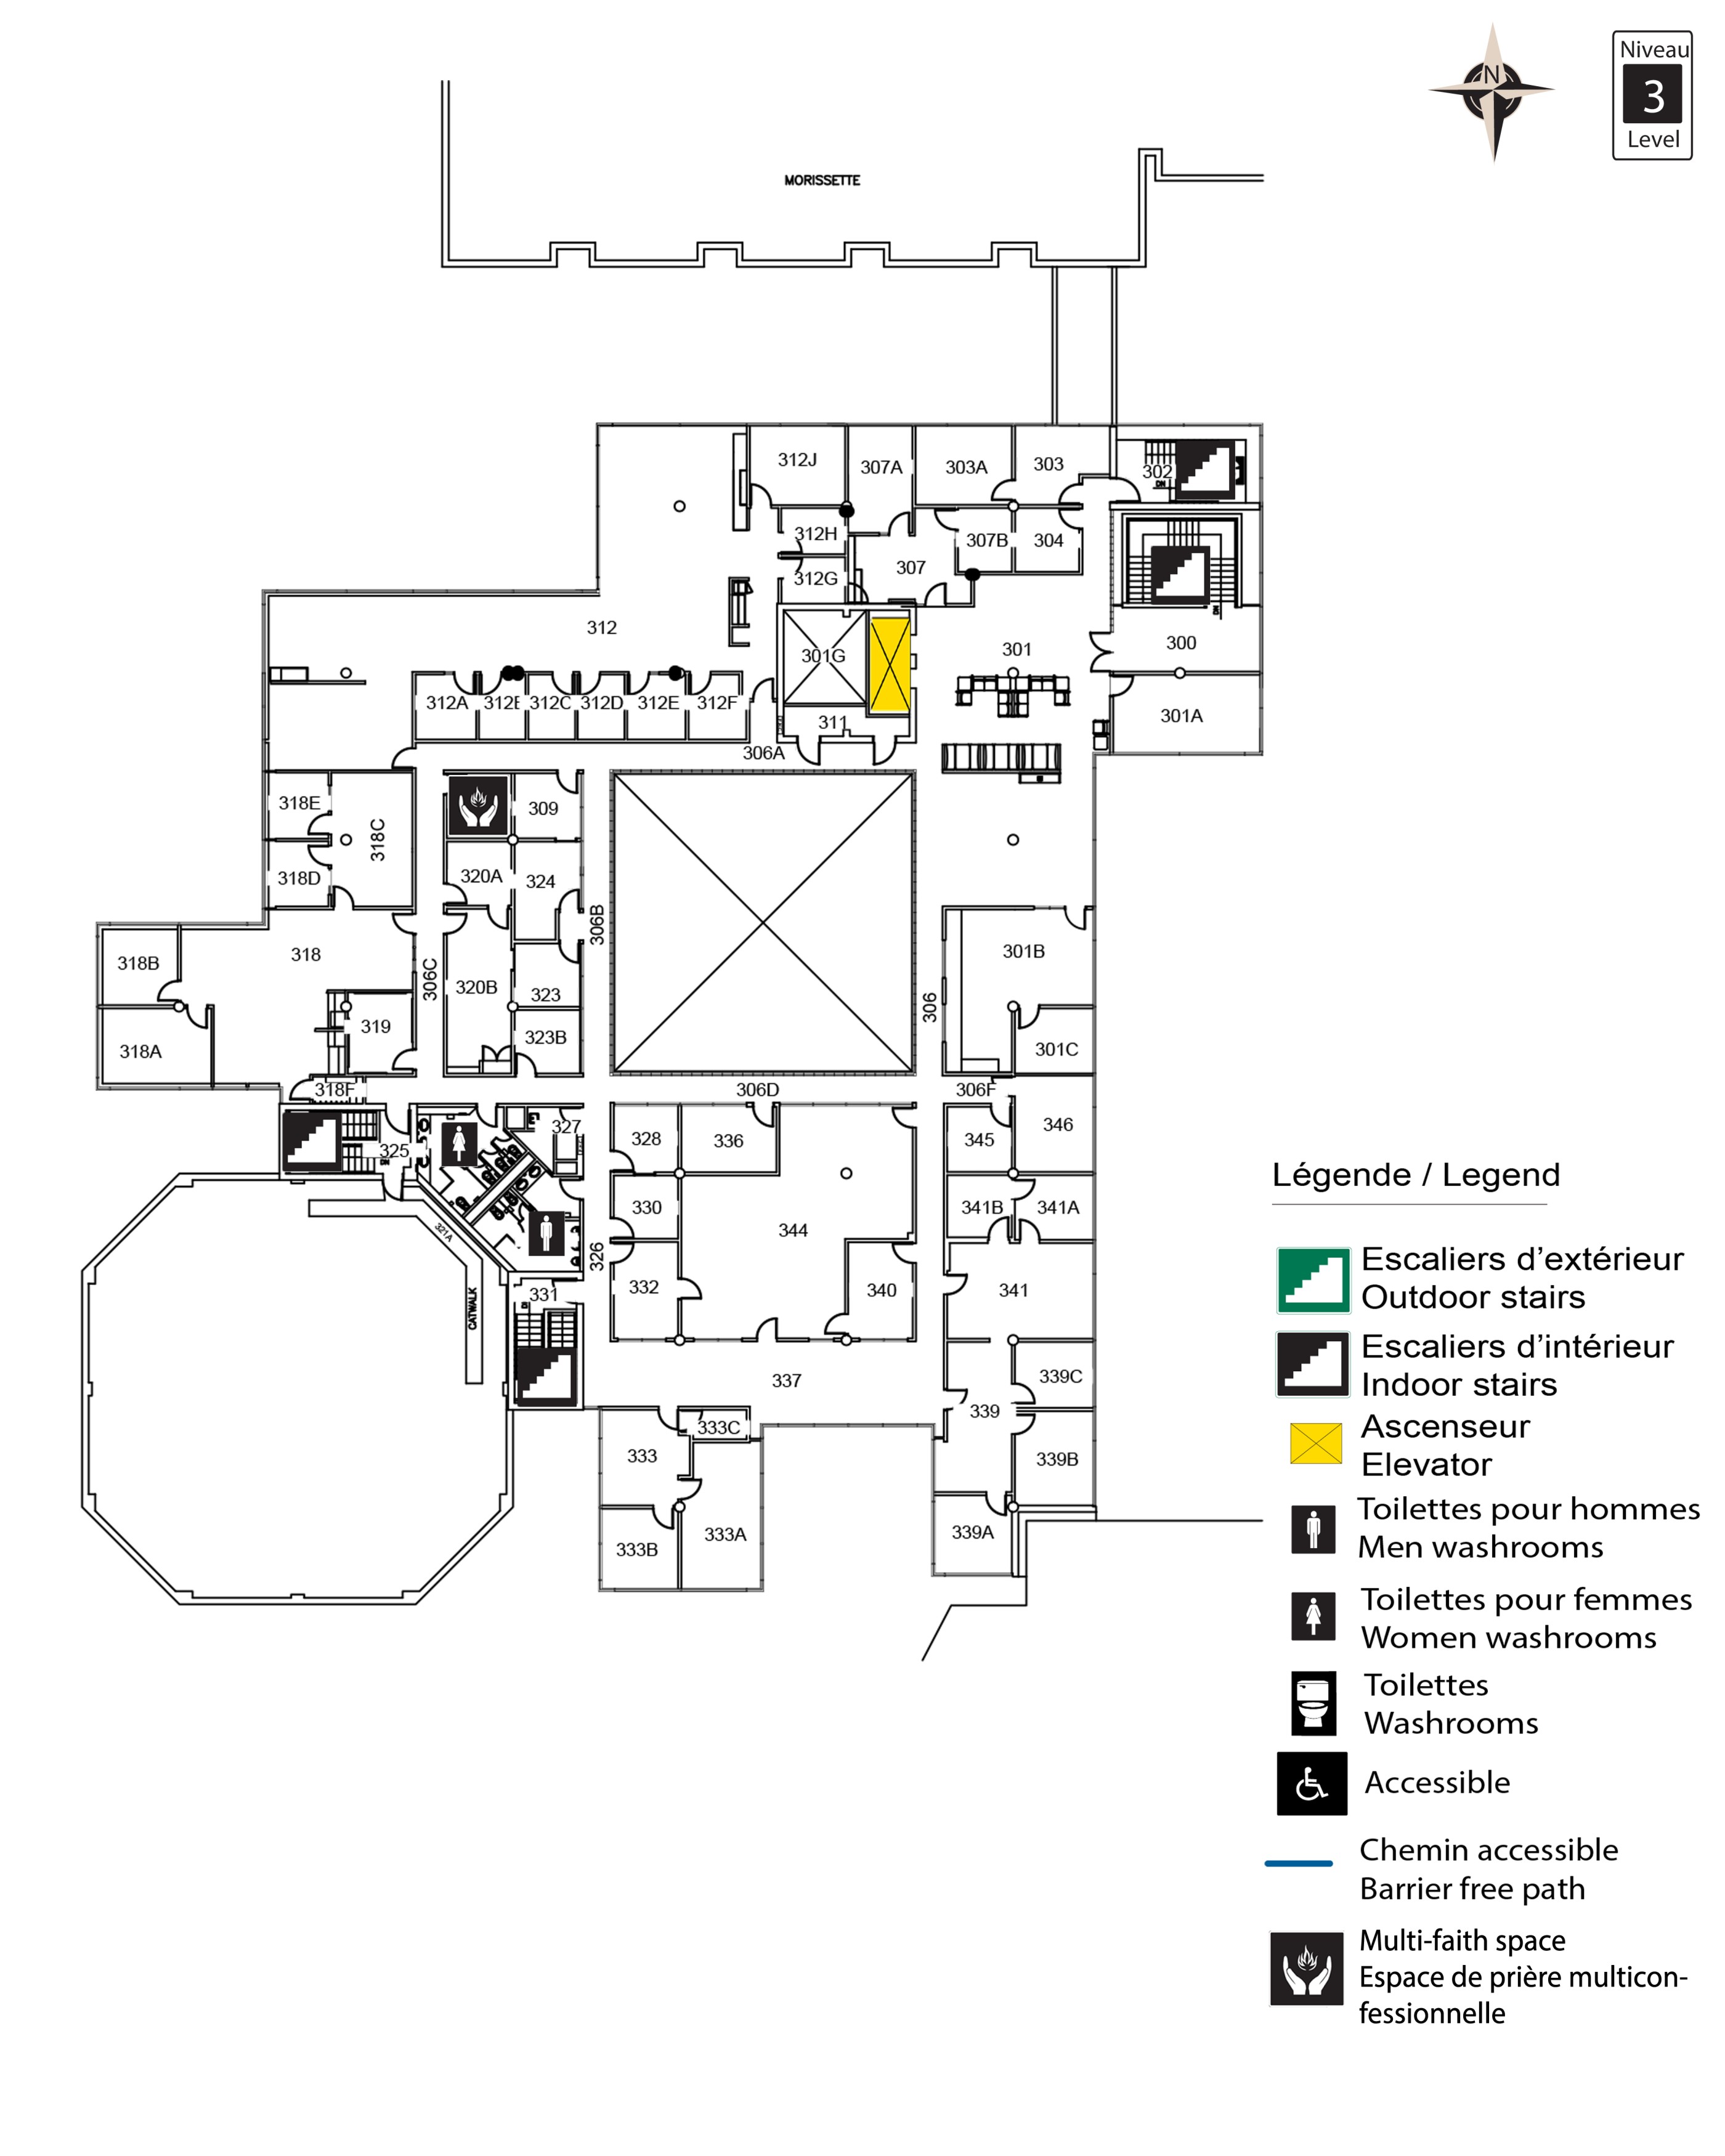 Accessible map of UCU level 3